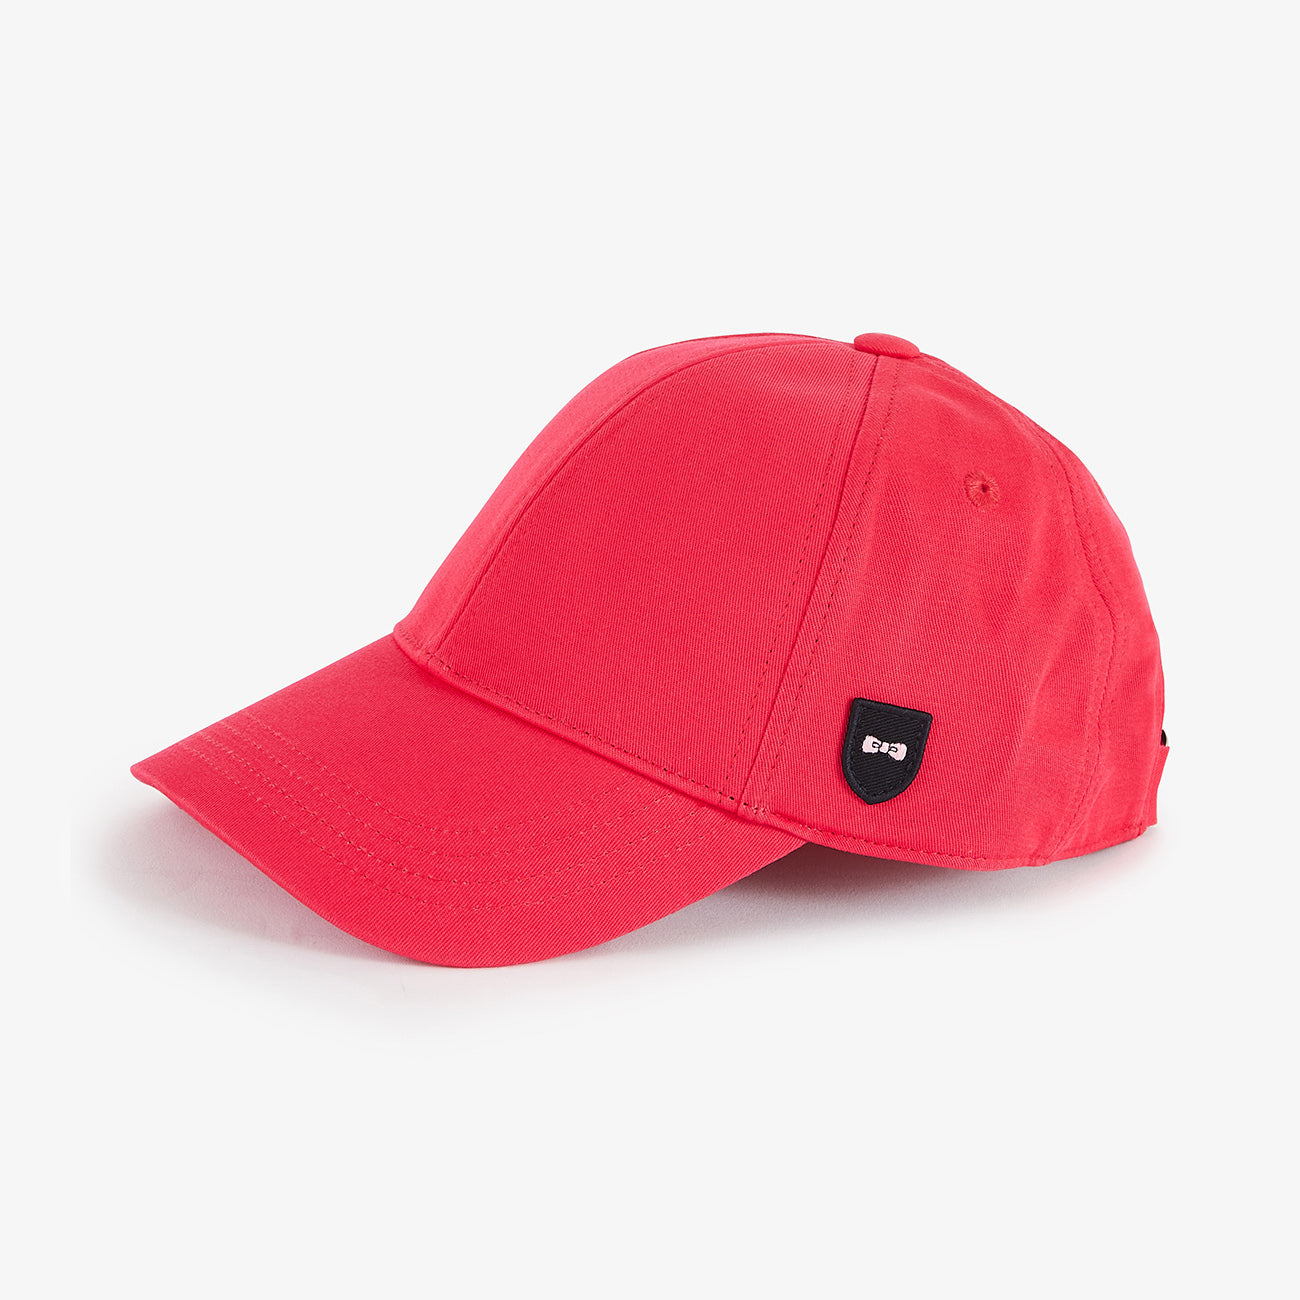 Eden Park Red Cotton Twill Baseball Cap crafted in a sturdy cotton twill, available at StylishGuy Menswear Dublin